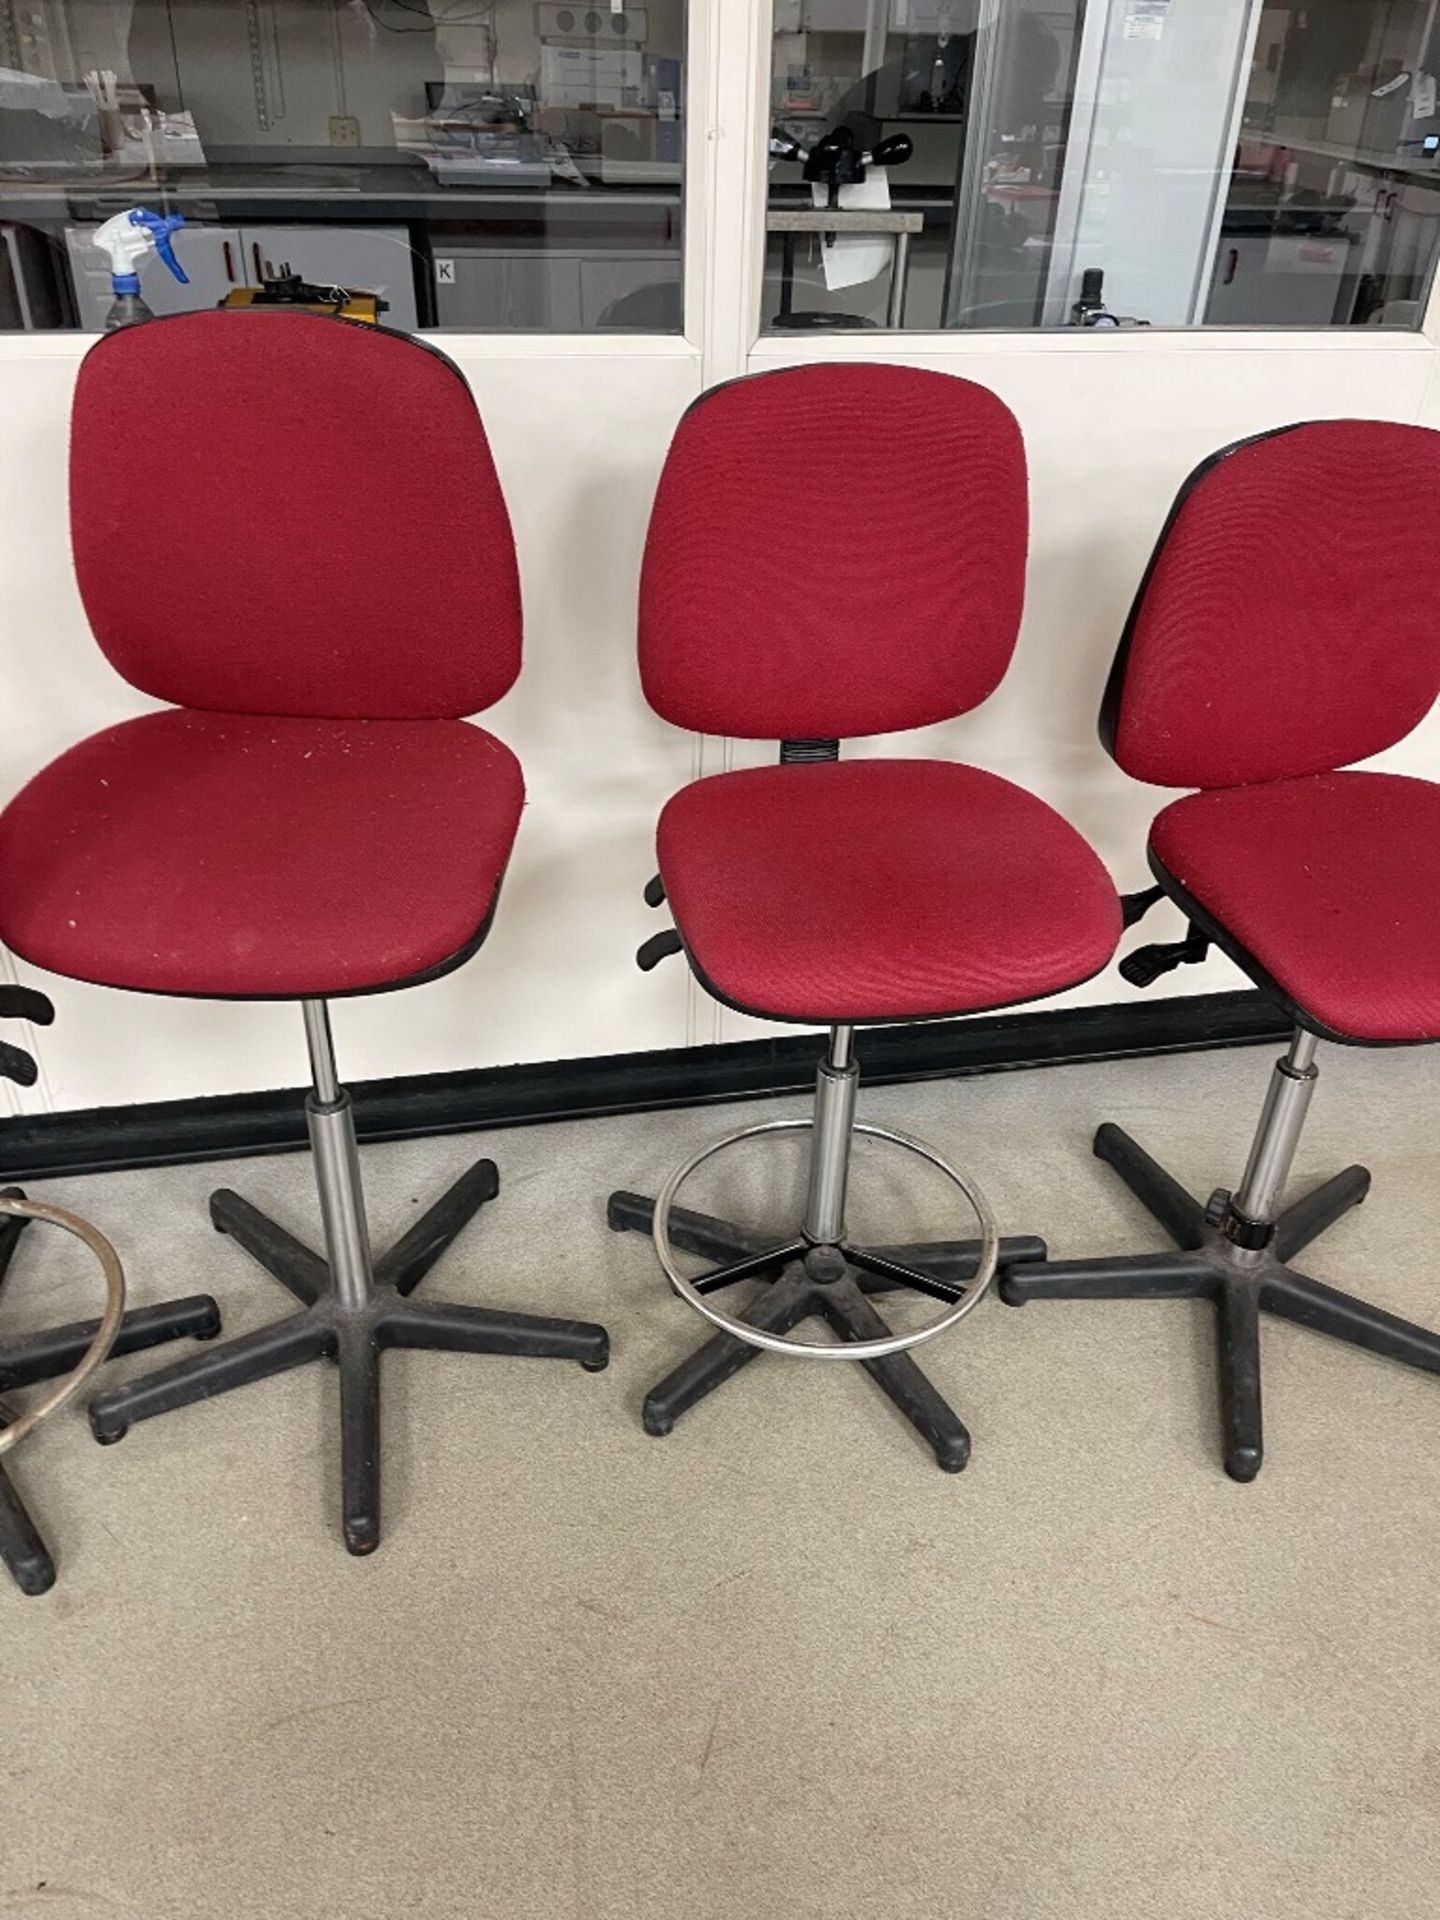 Four upholstered swivel laboratory chairs - Image 2 of 2